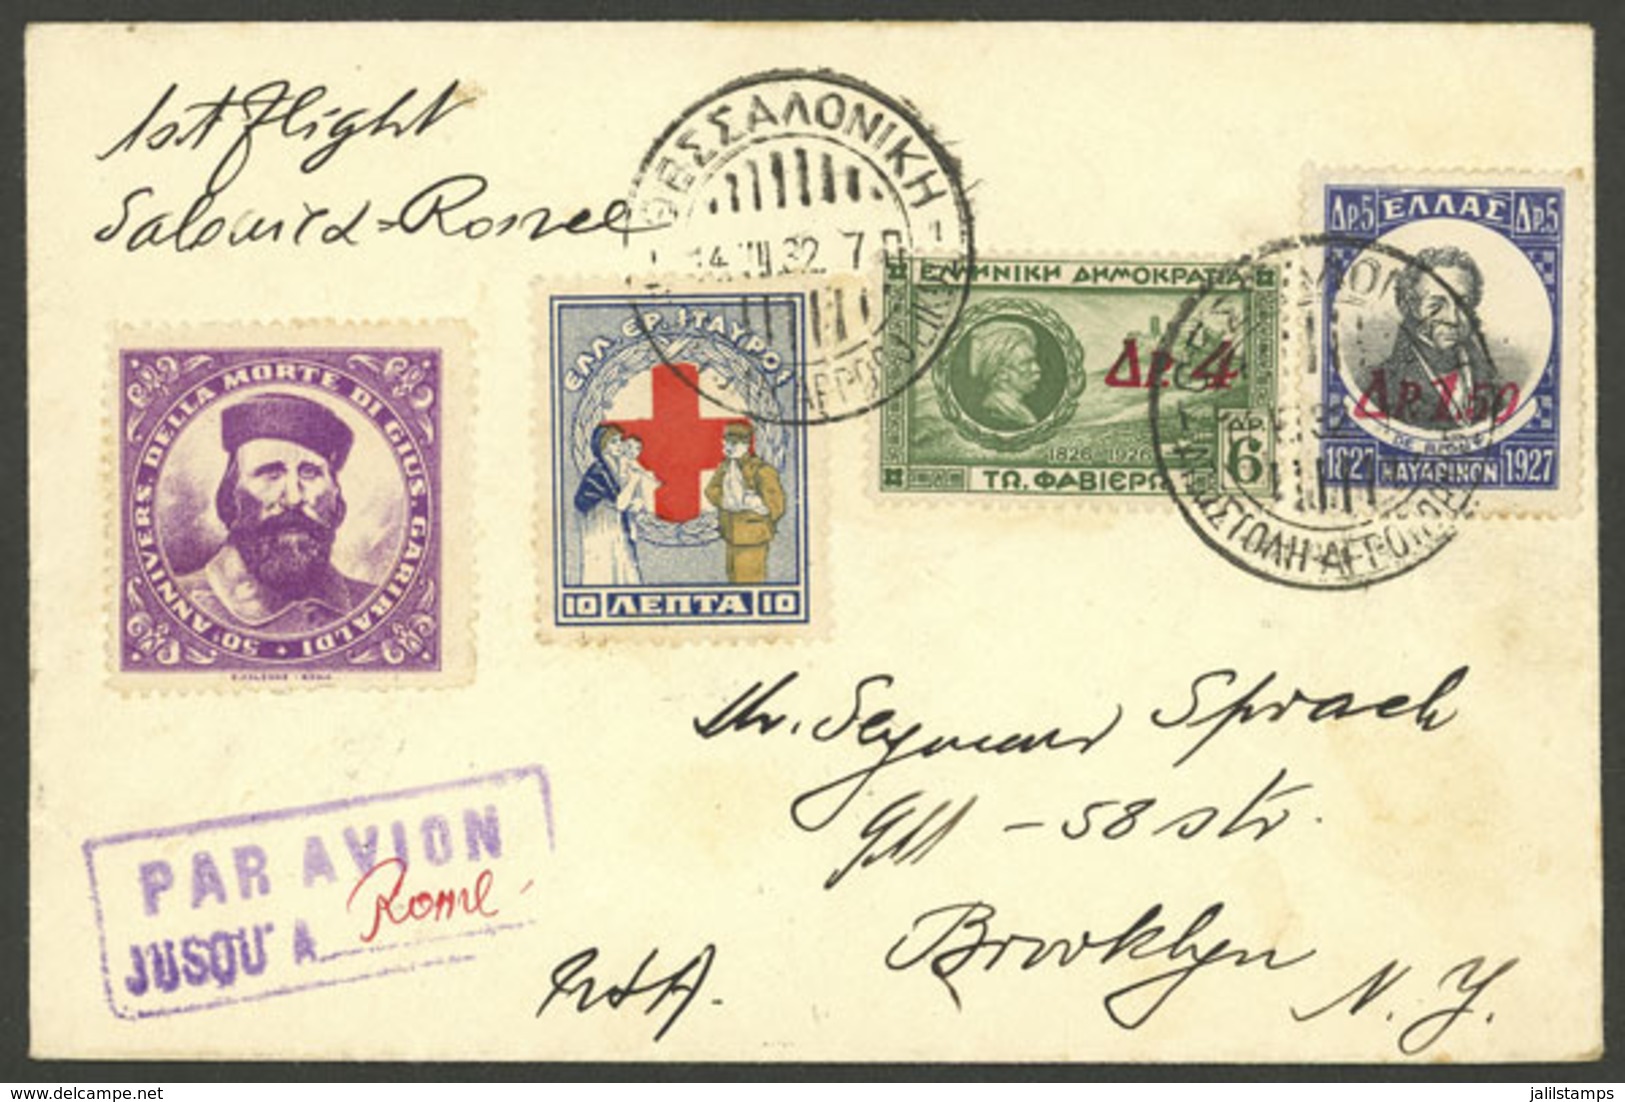 GREECE: 14/JUL/1932 First Flight Salonica - Roma By S.A.M., Cover Of Fine Quality, Scarce, Only 42 Letters Were Carried  - Storia Postale